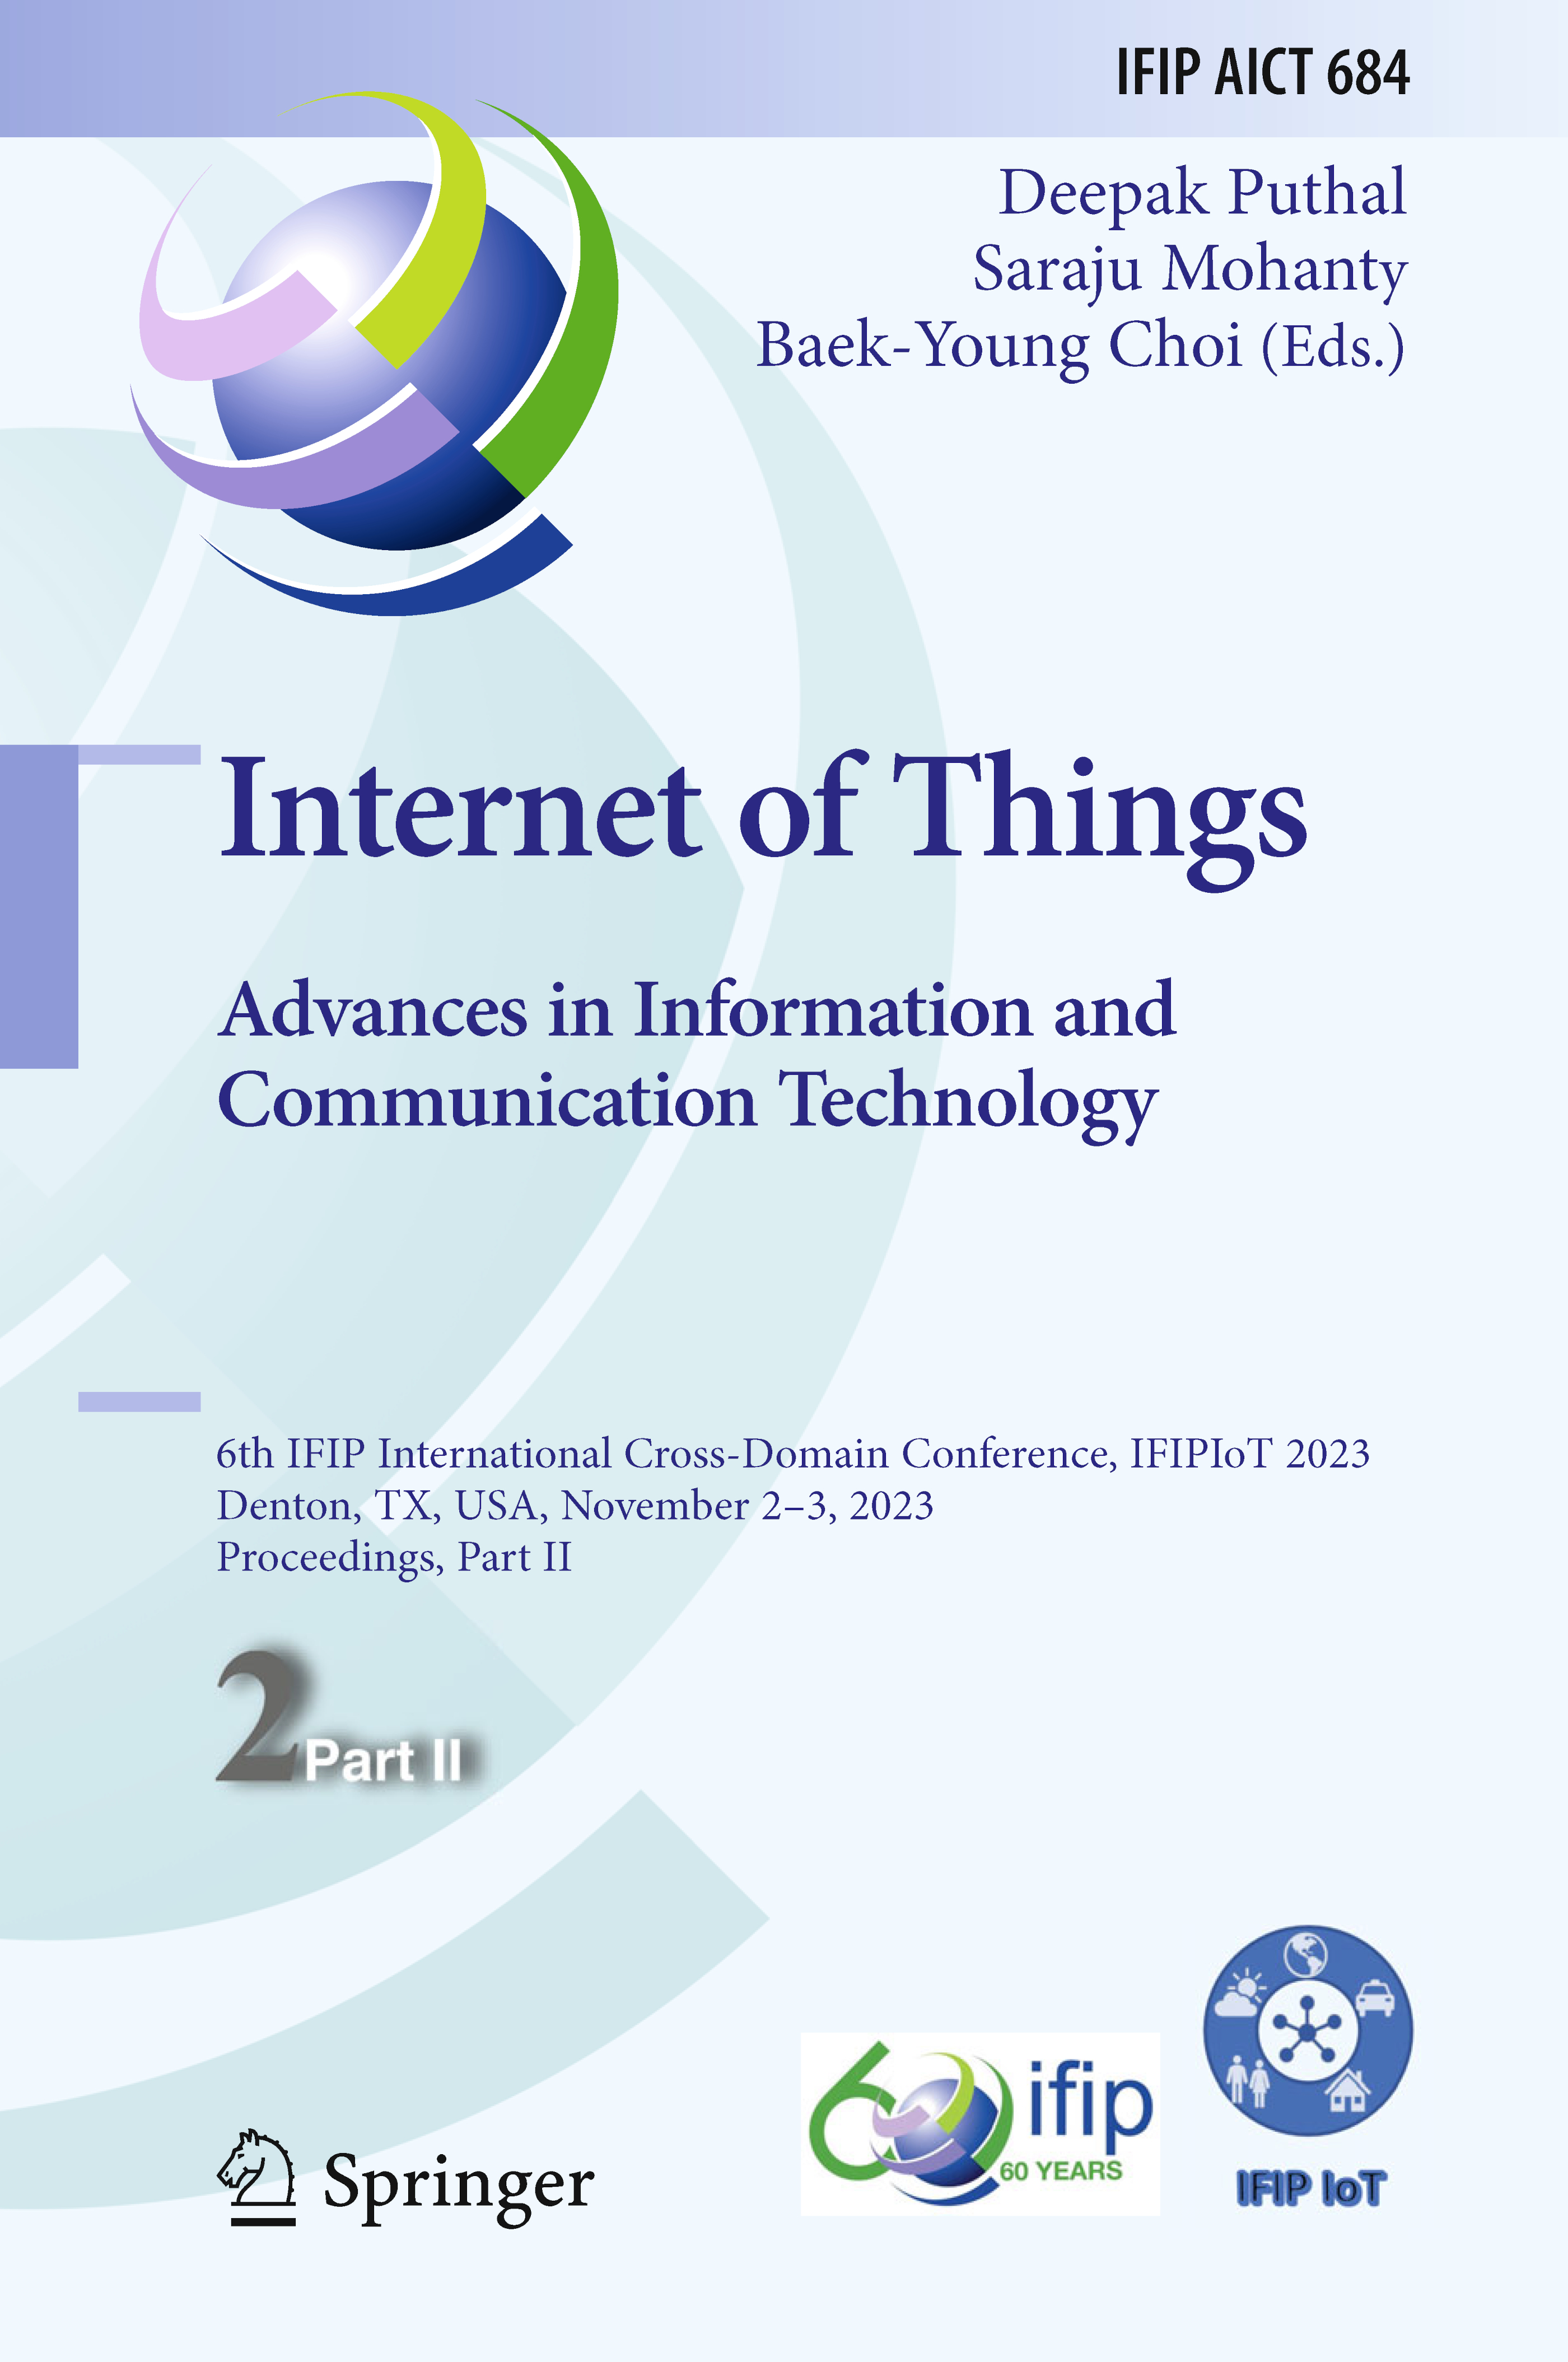 Proceedings of 6th IFIP International Cross-Domain Conference - IFIP-IoT 2023 - Part II, Springer Cham, 2024, ISBN: 978-3-031-45884-2